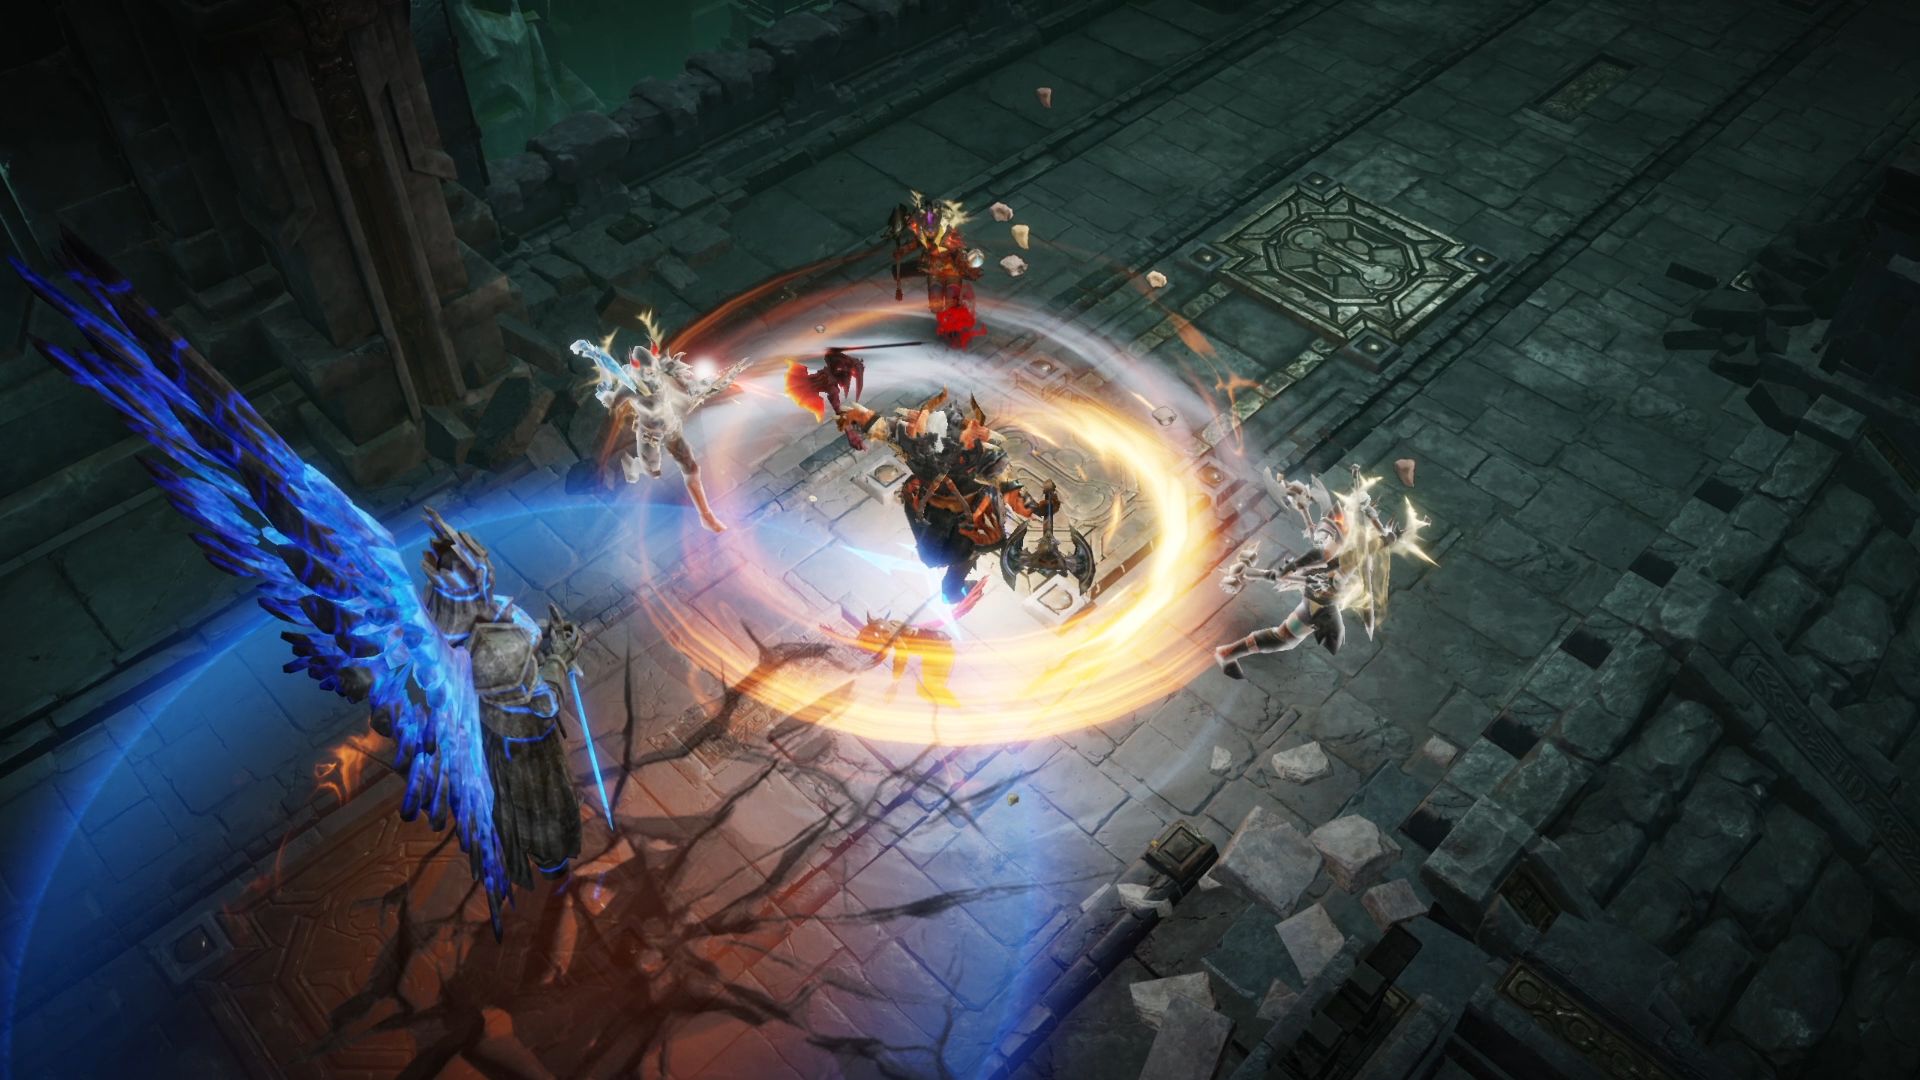 In this article, we will be covering the Diablo Immortal China launch delayed, as well as the Diablo Immortal refund policies that enraged the players.